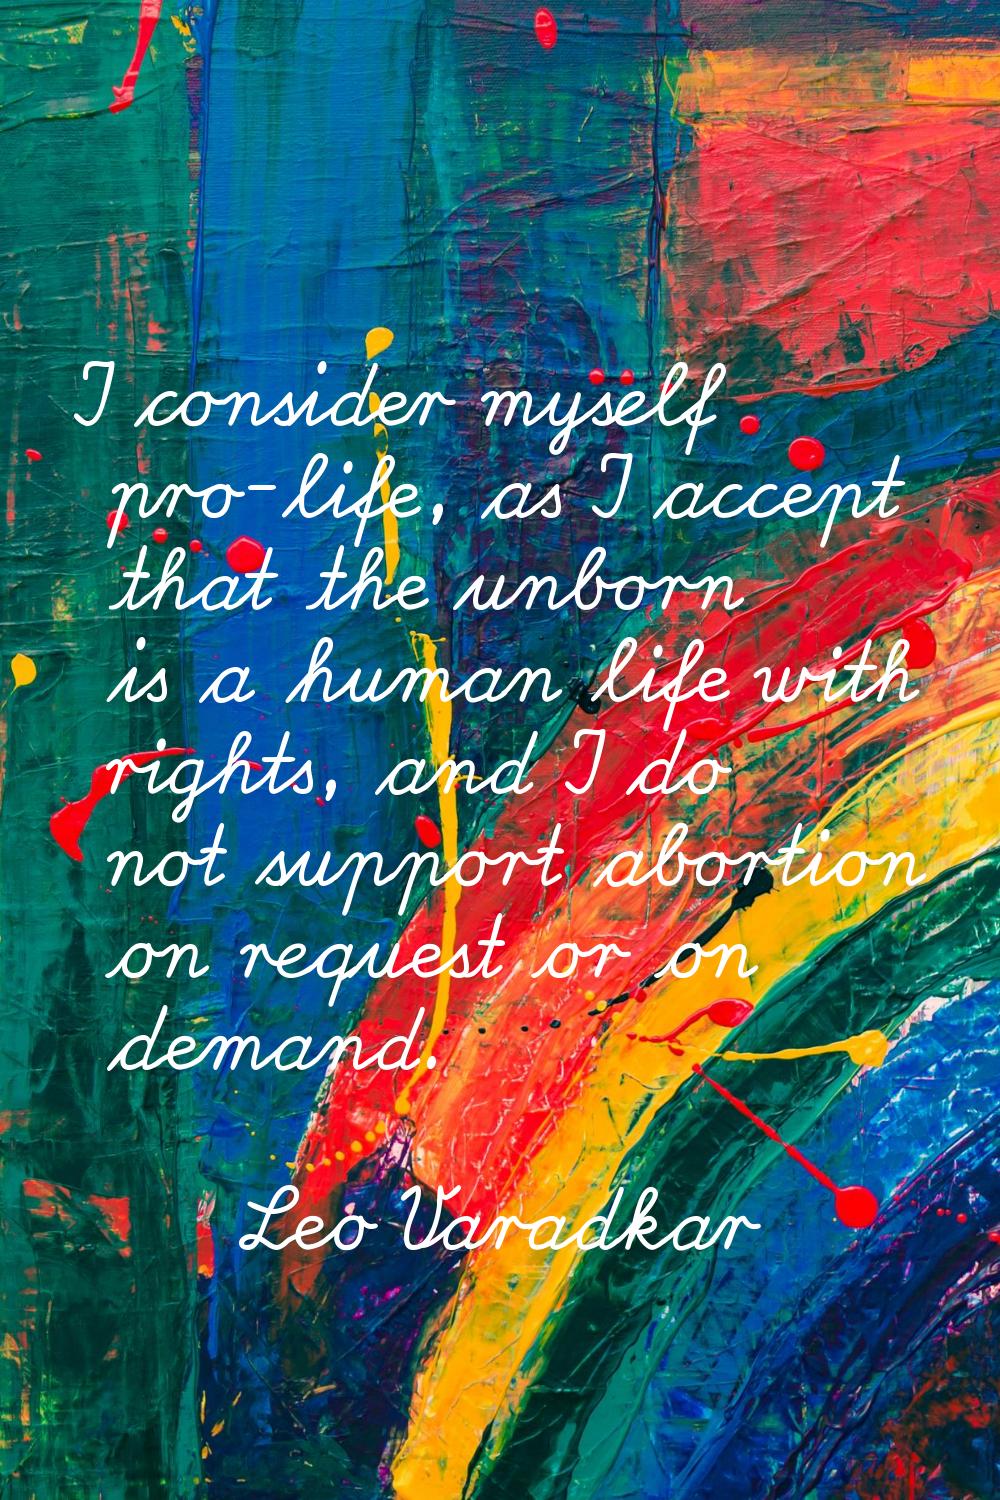 I consider myself pro-life, as I accept that the unborn is a human life with rights, and I do not s